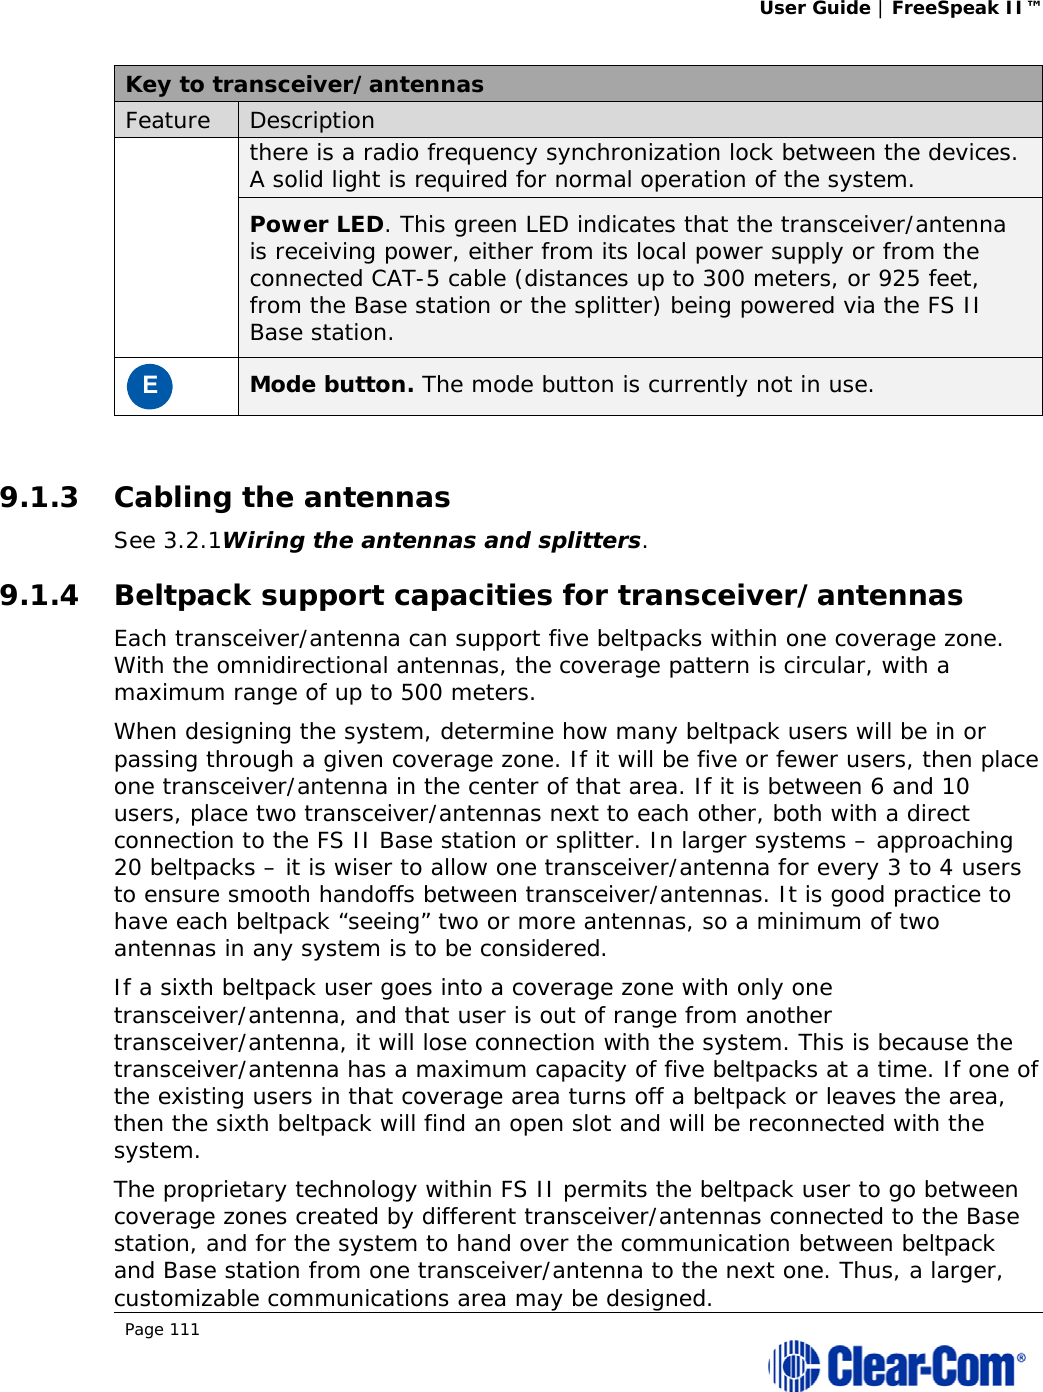 User Guide | FreeSpeak II™  Page 111  Key to transceiver/antennas Feature  Description there is a radio frequency synchronization lock between the devices. A solid light is required for normal operation of the system. Power LED. This green LED indicates that the transceiver/antenna is receiving power, either from its local power supply or from the connected CAT-5 cable (distances up to 300 meters, or 925 feet, from the Base station or the splitter) being powered via the FS II Base station. E Mode button. The mode button is currently not in use.  9.1.3 Cabling the antennas See 3.2.1Wiring the antennas and splitters.  9.1.4 Beltpack support capacities for transceiver/antennas Each transceiver/antenna can support five beltpacks within one coverage zone. With the omnidirectional antennas, the coverage pattern is circular, with a maximum range of up to 500 meters.  When designing the system, determine how many beltpack users will be in or passing through a given coverage zone. If it will be five or fewer users, then place one transceiver/antenna in the center of that area. If it is between 6 and 10 users, place two transceiver/antennas next to each other, both with a direct connection to the FS II Base station or splitter. In larger systems – approaching 20 beltpacks – it is wiser to allow one transceiver/antenna for every 3 to 4 users to ensure smooth handoffs between transceiver/antennas. It is good practice to have each beltpack “seeing” two or more antennas, so a minimum of two antennas in any system is to be considered.  If a sixth beltpack user goes into a coverage zone with only one transceiver/antenna, and that user is out of range from another transceiver/antenna, it will lose connection with the system. This is because the transceiver/antenna has a maximum capacity of five beltpacks at a time. If one of the existing users in that coverage area turns off a beltpack or leaves the area, then the sixth beltpack will find an open slot and will be reconnected with the system. The proprietary technology within FS II permits the beltpack user to go between coverage zones created by different transceiver/antennas connected to the Base station, and for the system to hand over the communication between beltpack and Base station from one transceiver/antenna to the next one. Thus, a larger, customizable communications area may be designed.  